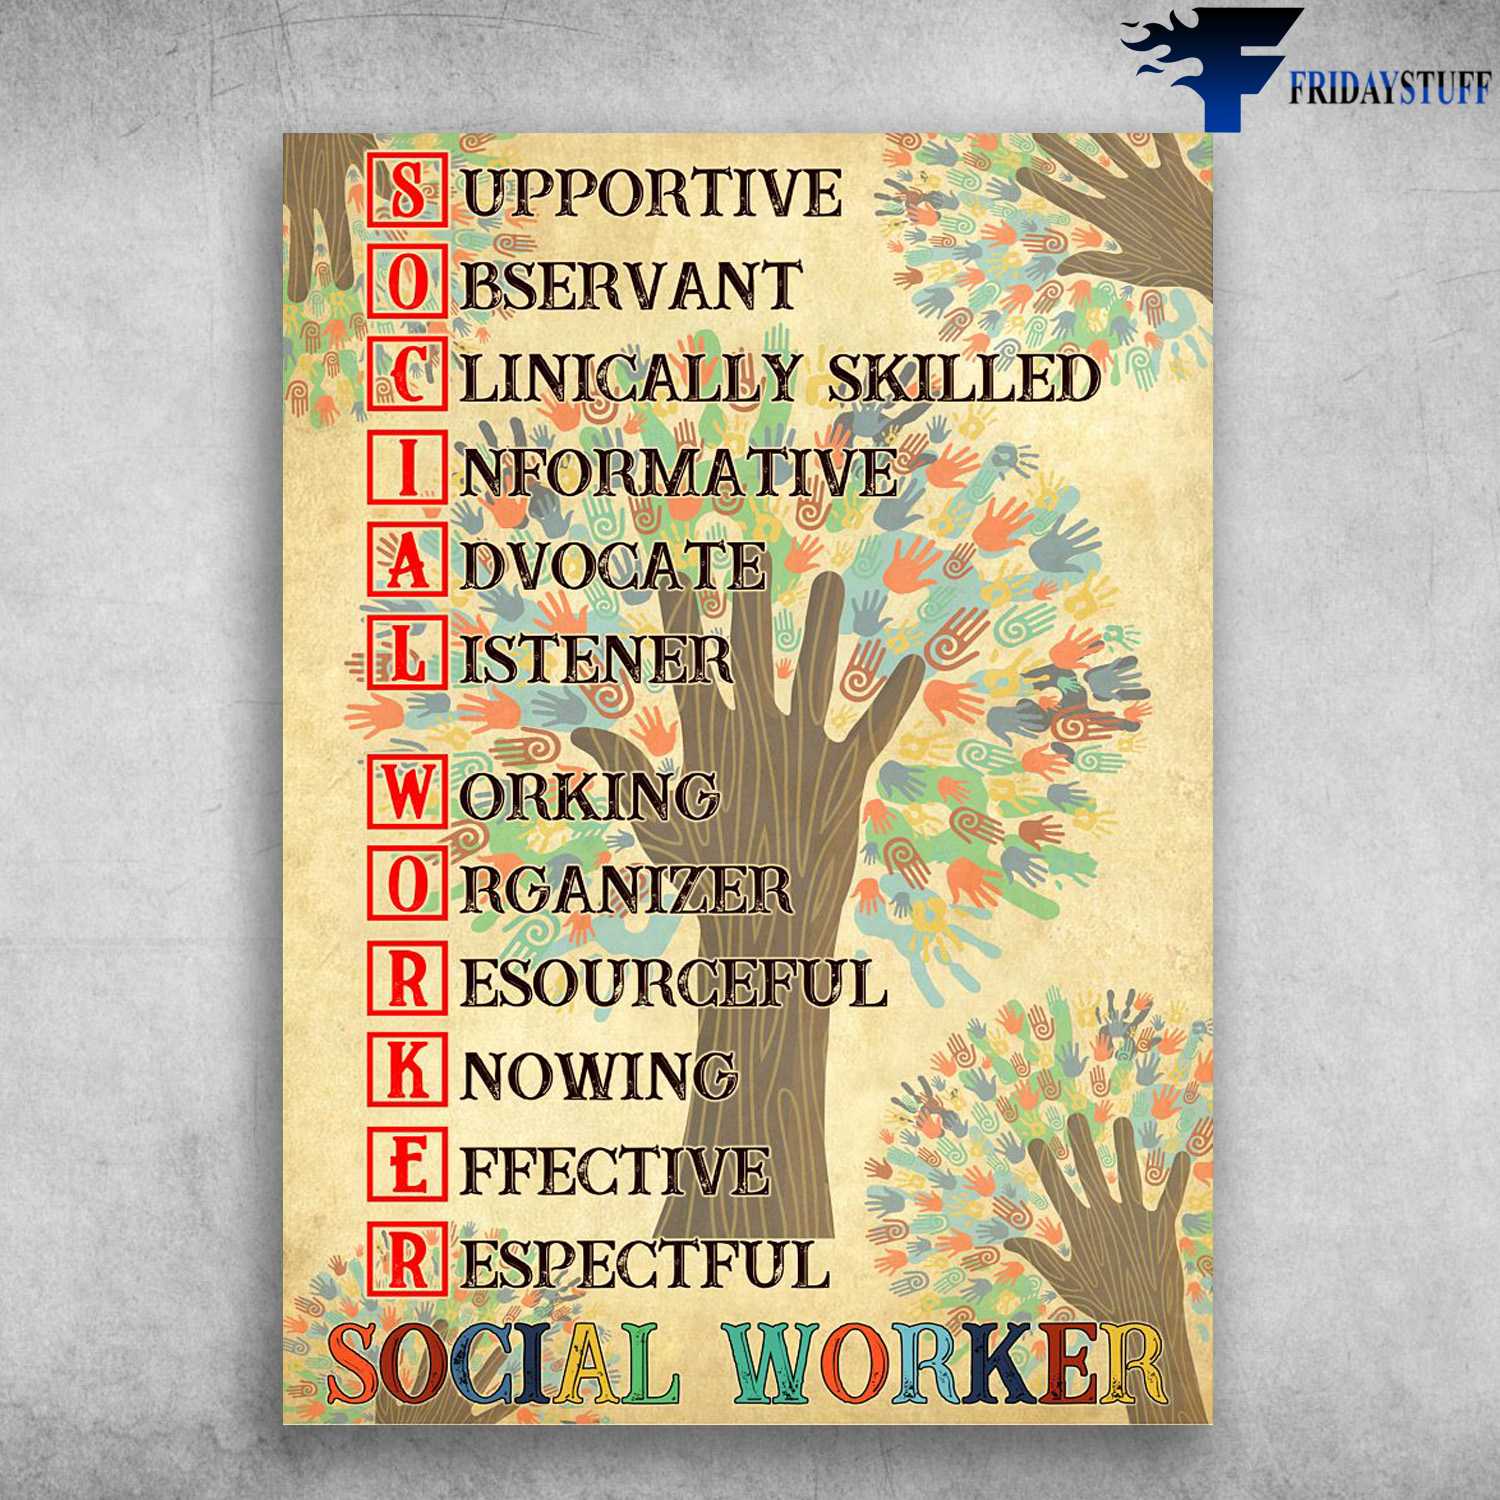 Social Worker - Suppoetive, Observant, Clinically Skilled, Infomative, Advocate, Listener, Working, Organizer